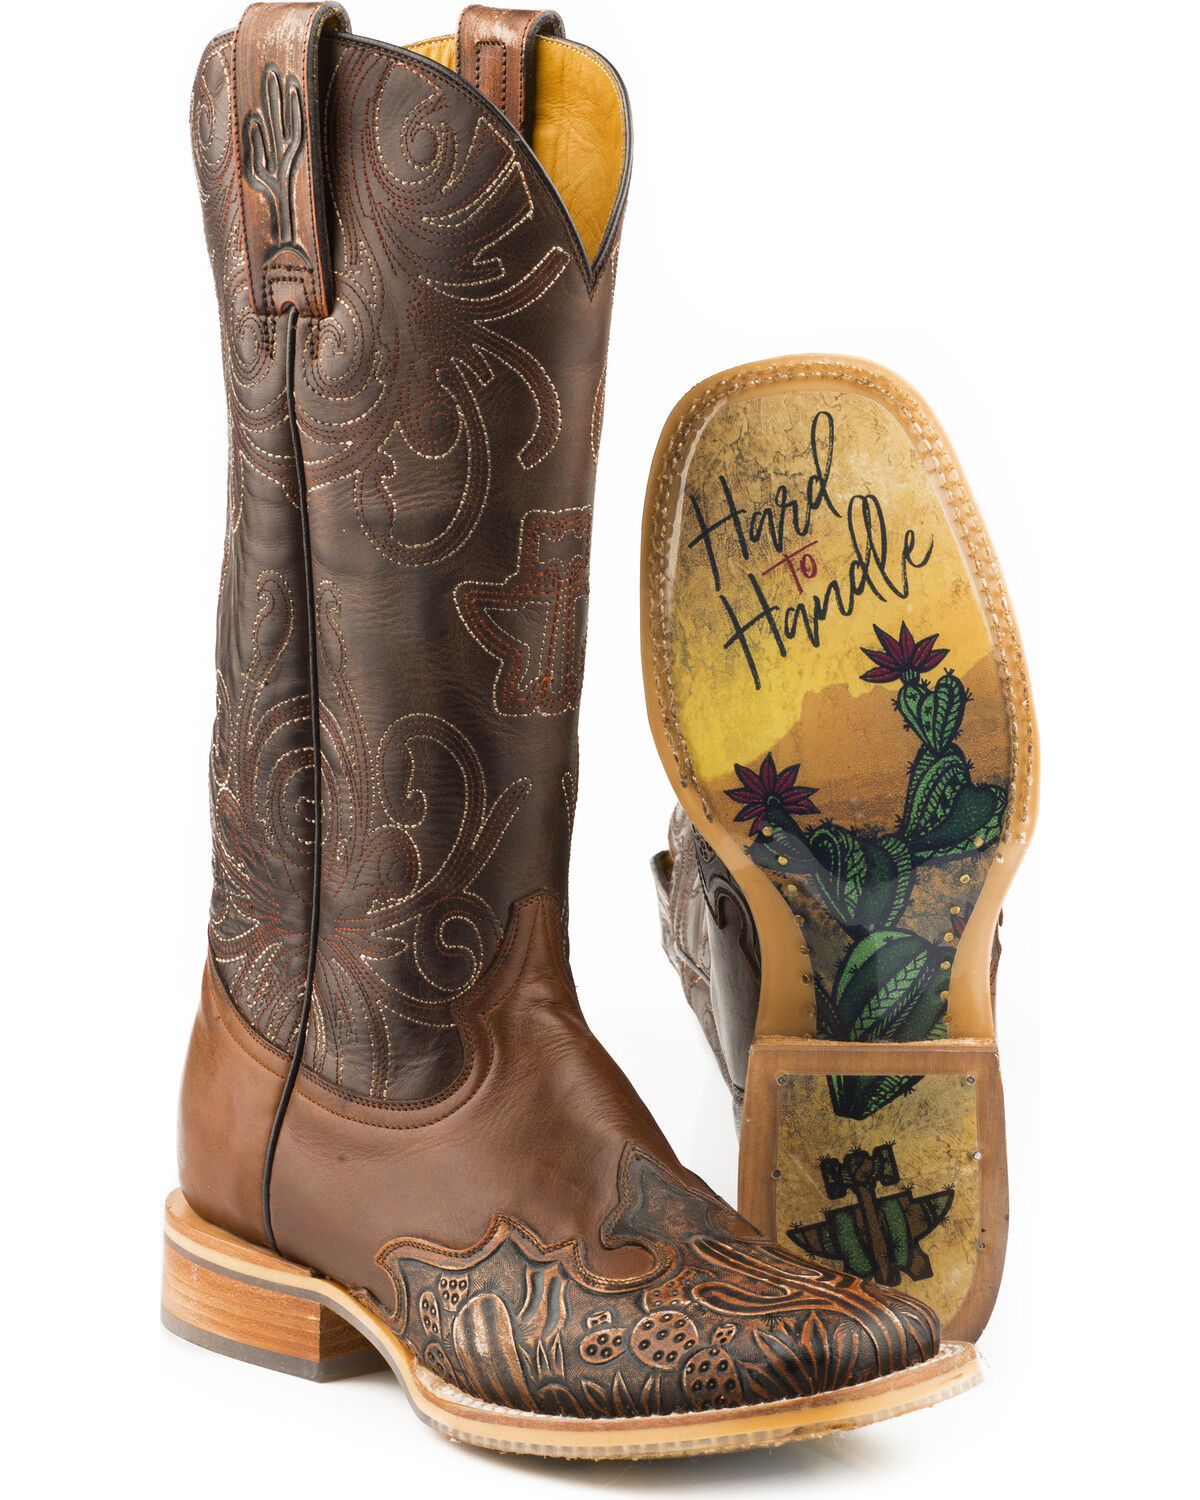 New Tin Haul Women's FEATHER PLUME COWBOY BOOTS w/ Peacock Sole Size 8 9 10 11 